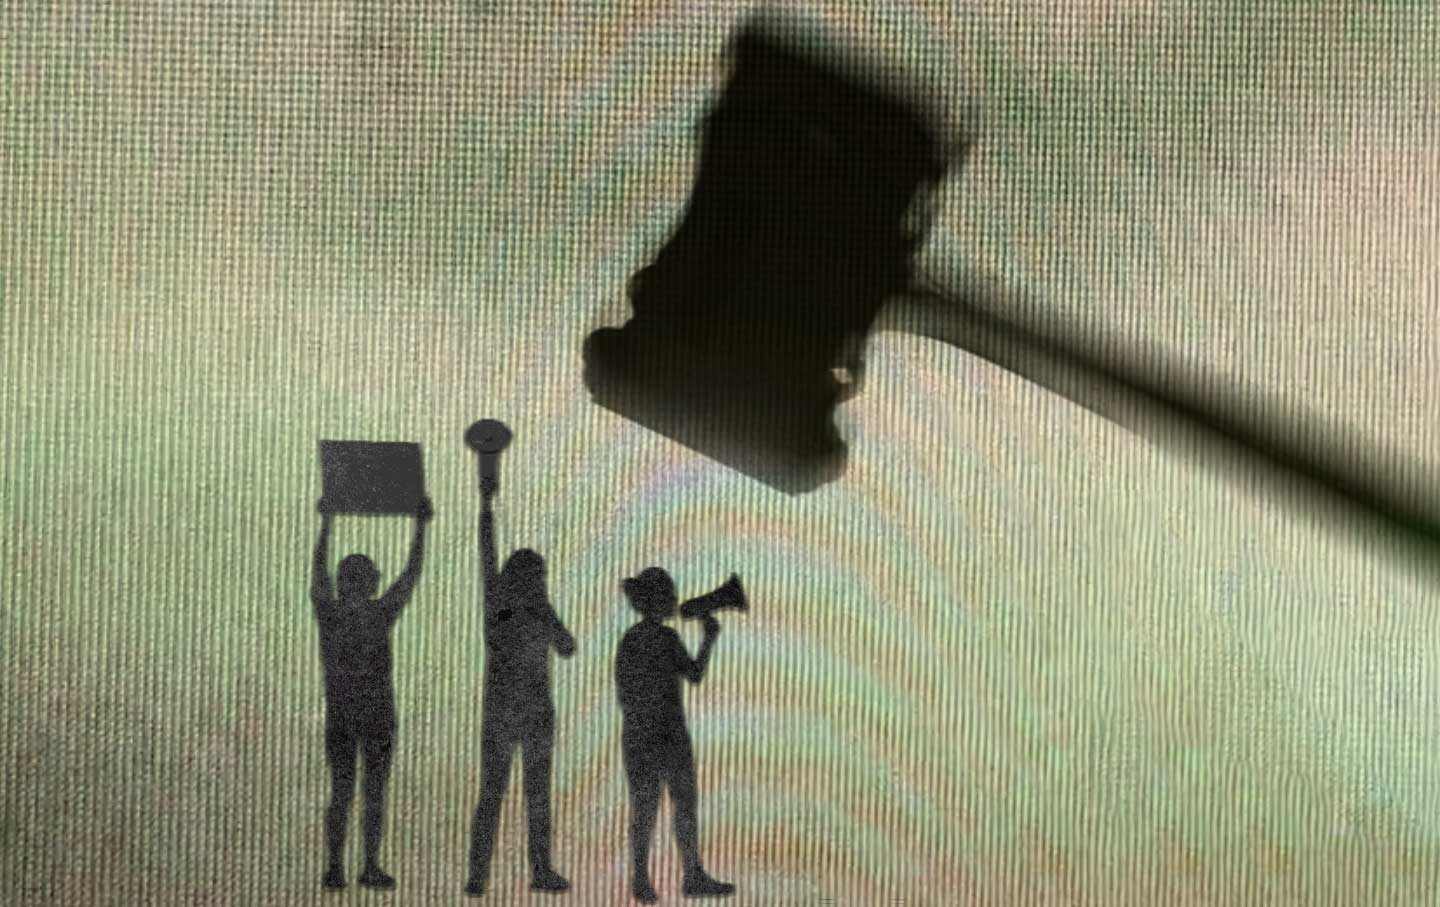 Illustration of protesters beneath a gavel.